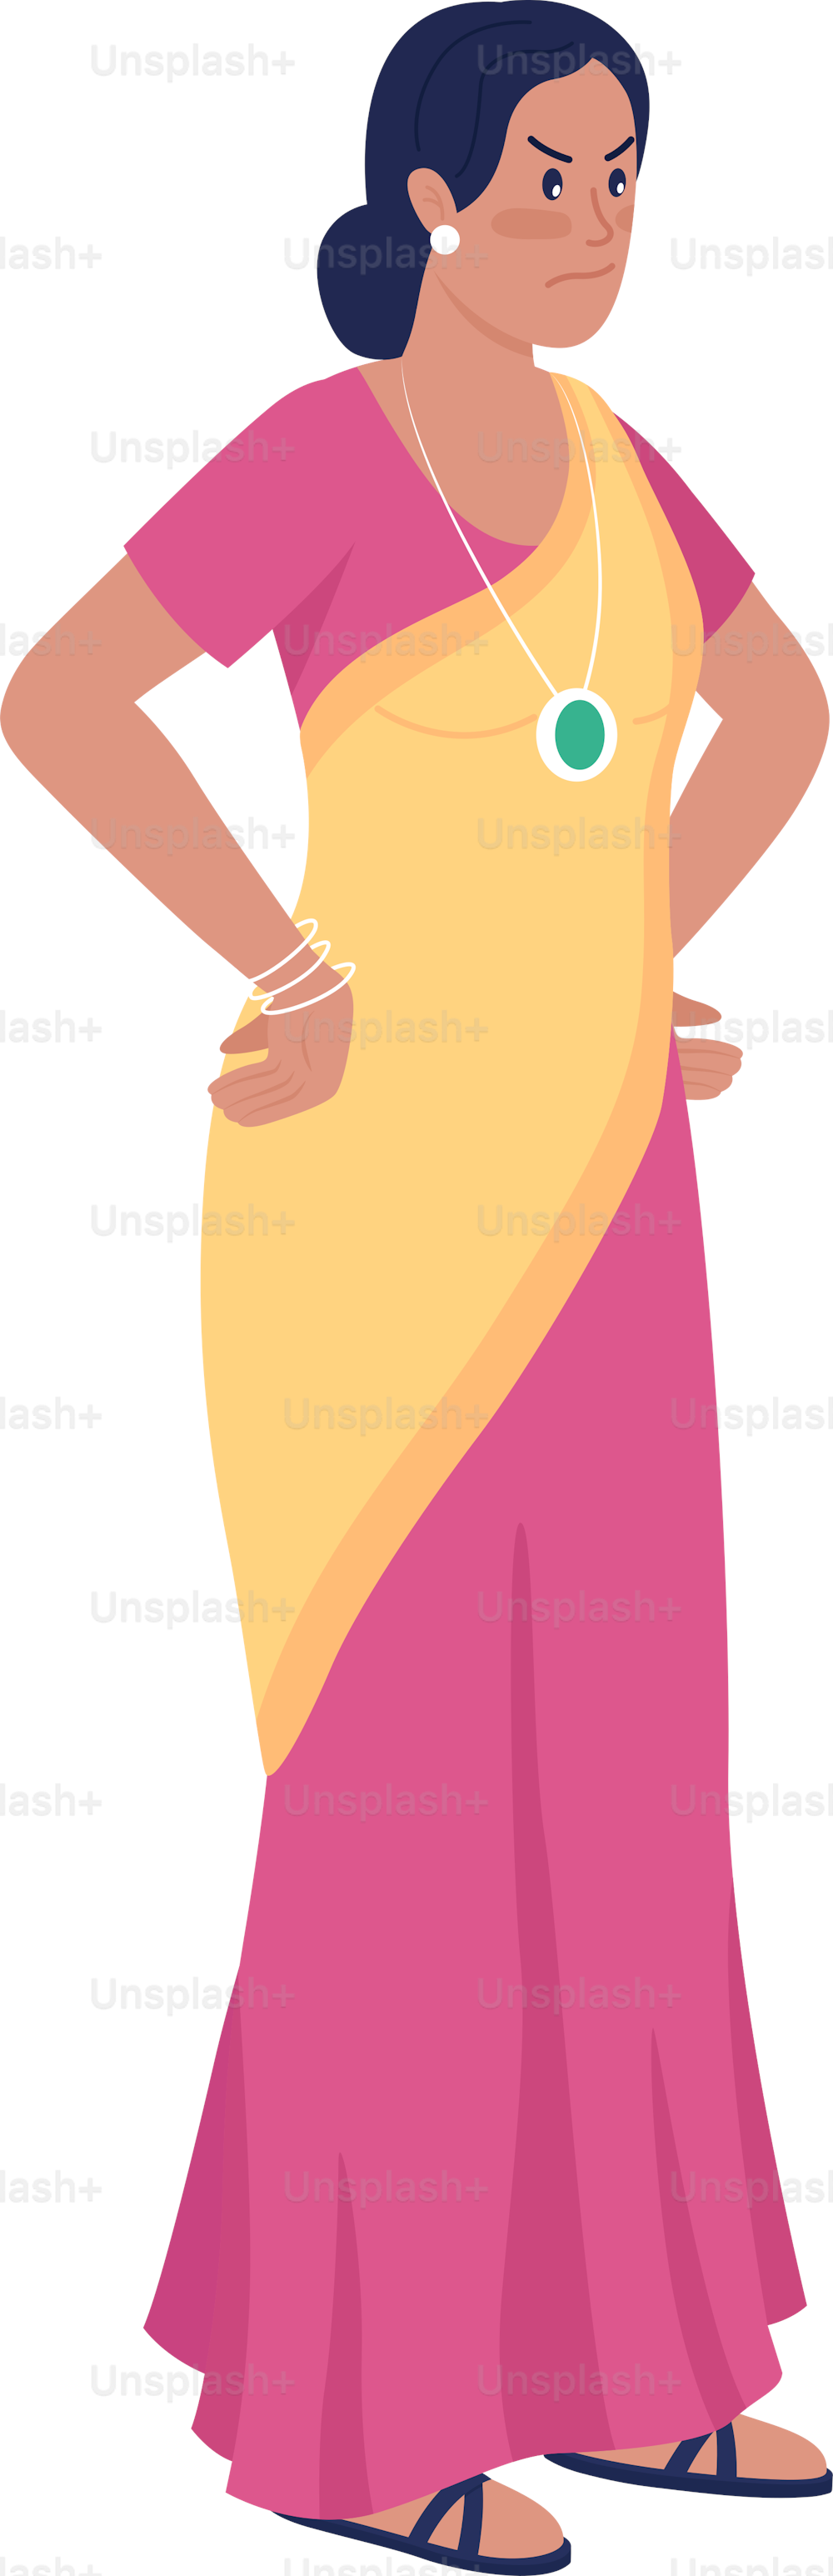 Upset stressed woman semi flat color vector character. Standing figure. Full body person on white. Problems and stress isolated modern cartoon style illustration for graphic design and animation